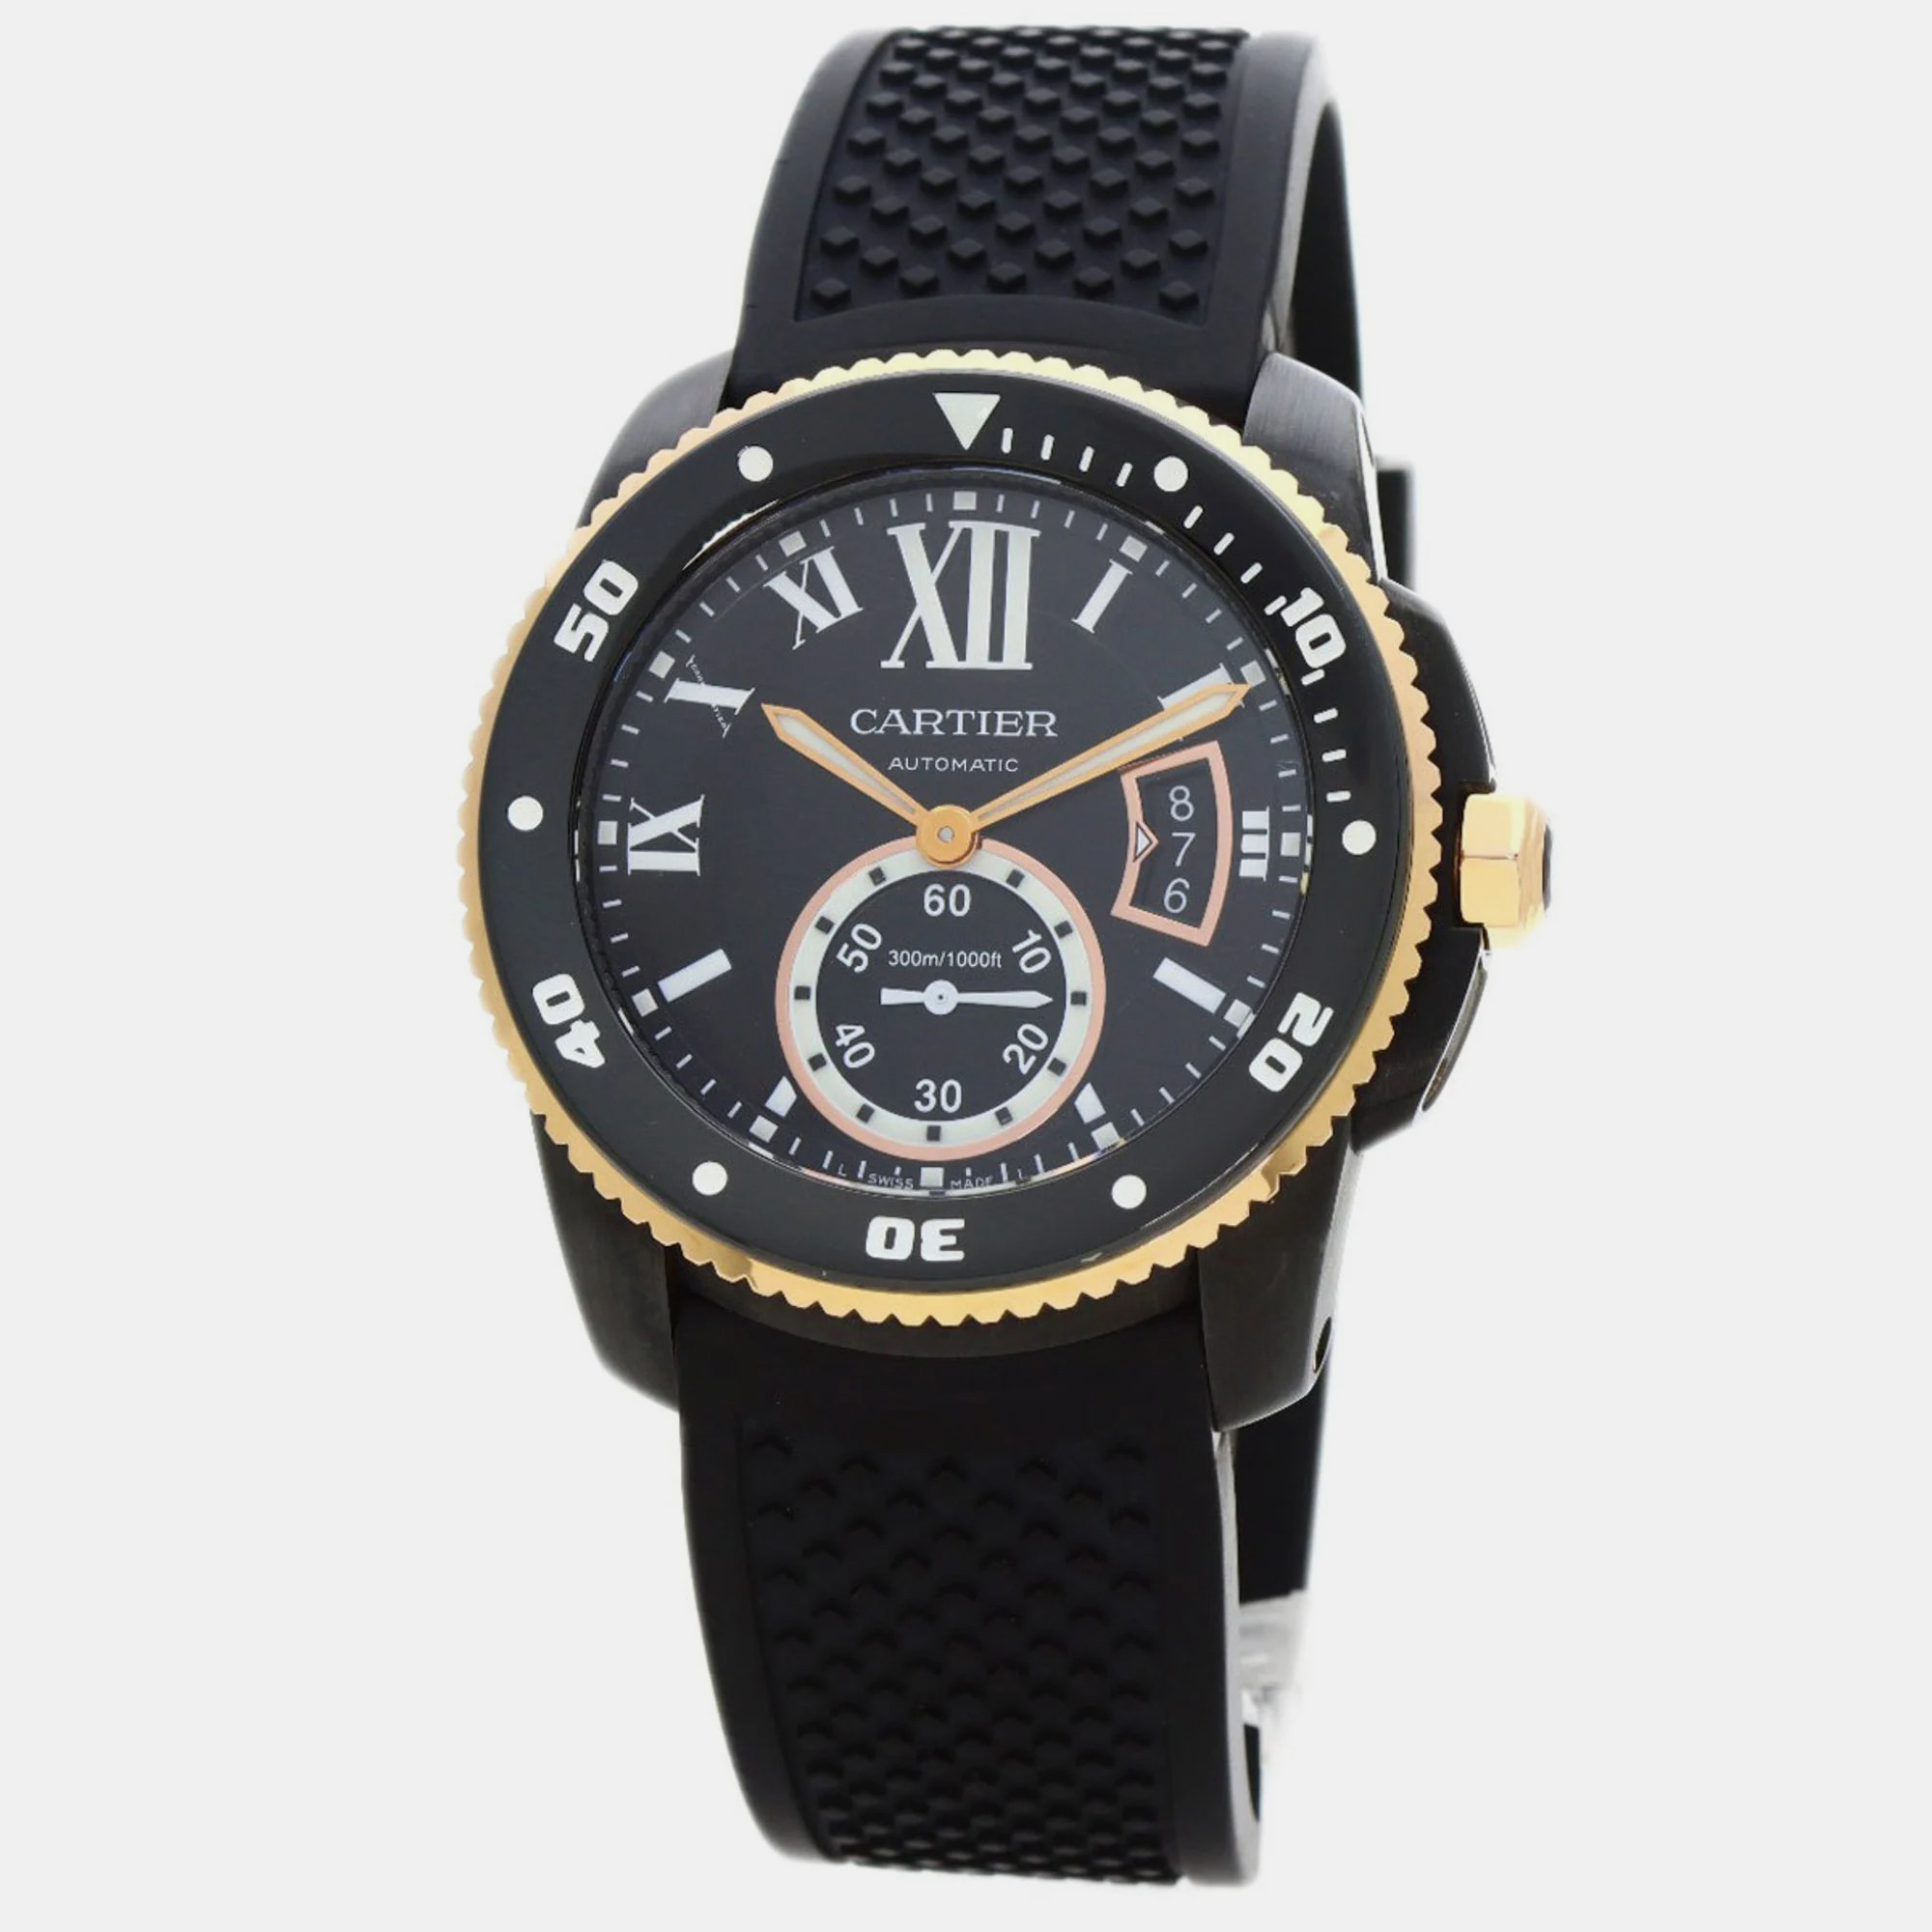 Let this fine Cartier wristwatch accompany you with ease and luxurious style. Beautifully crafted using the best quality materials this authentic branded watch is built to be a standout accessory for your wrist.